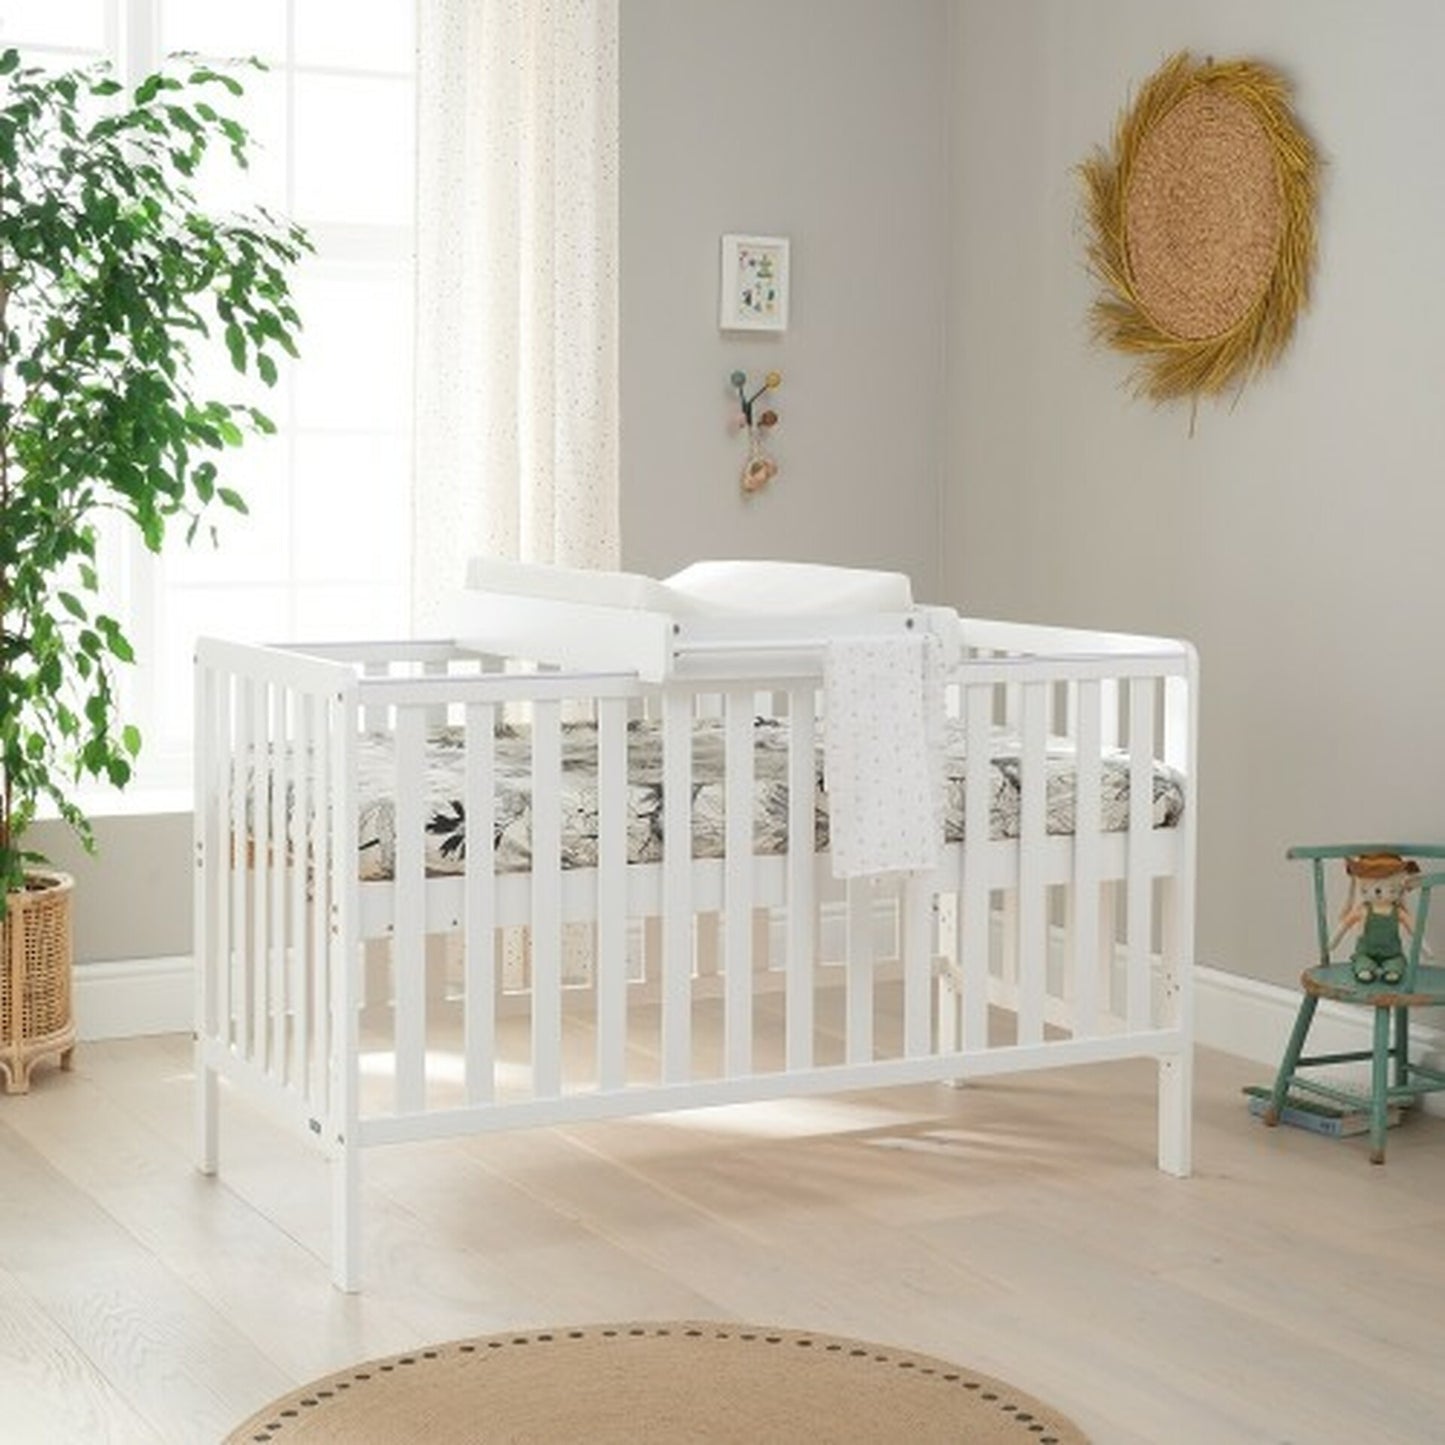 Malmo Cot Bed & Mattress with Cot Top Changer - White